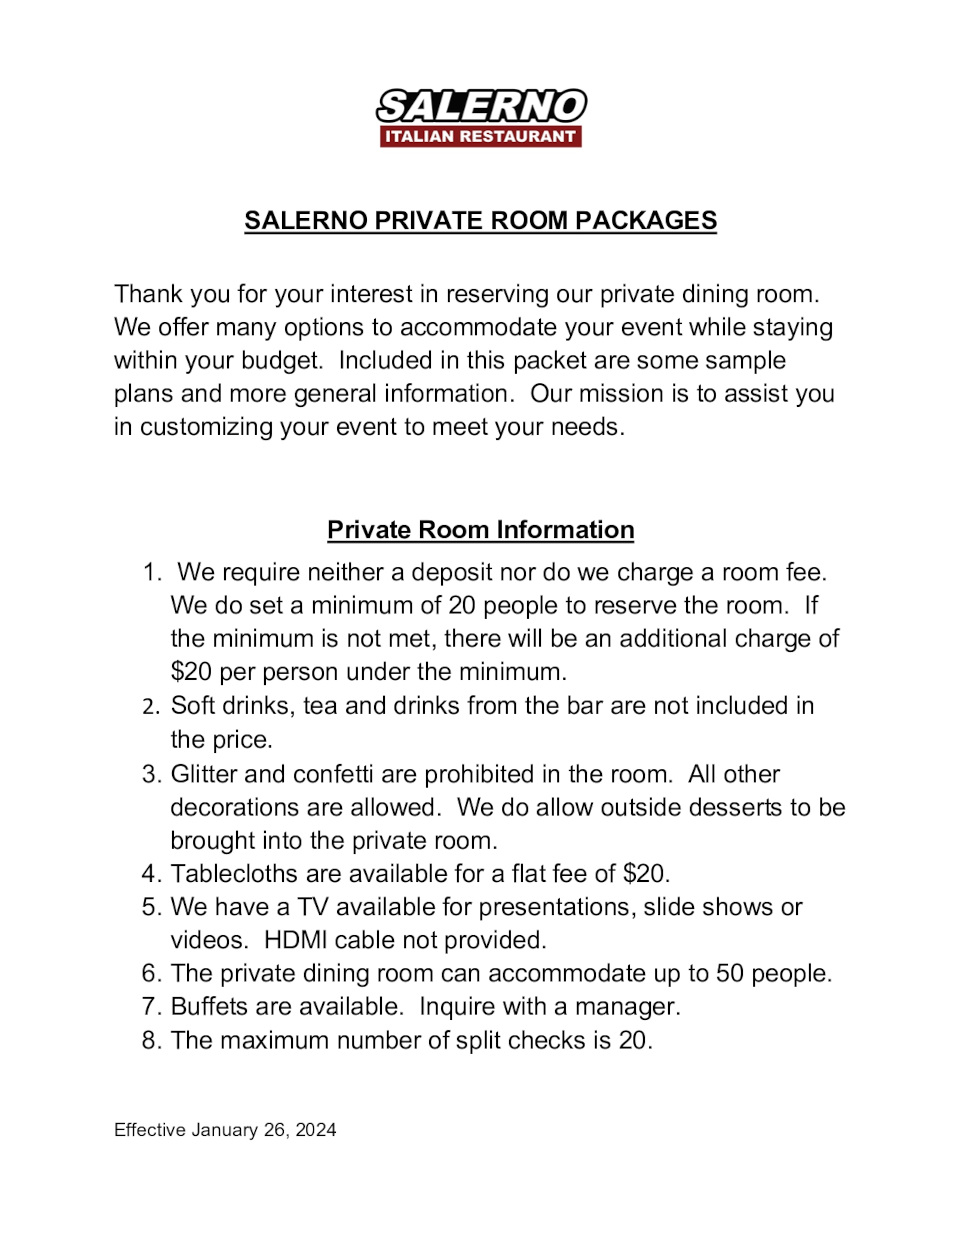 Private Room Packages 1